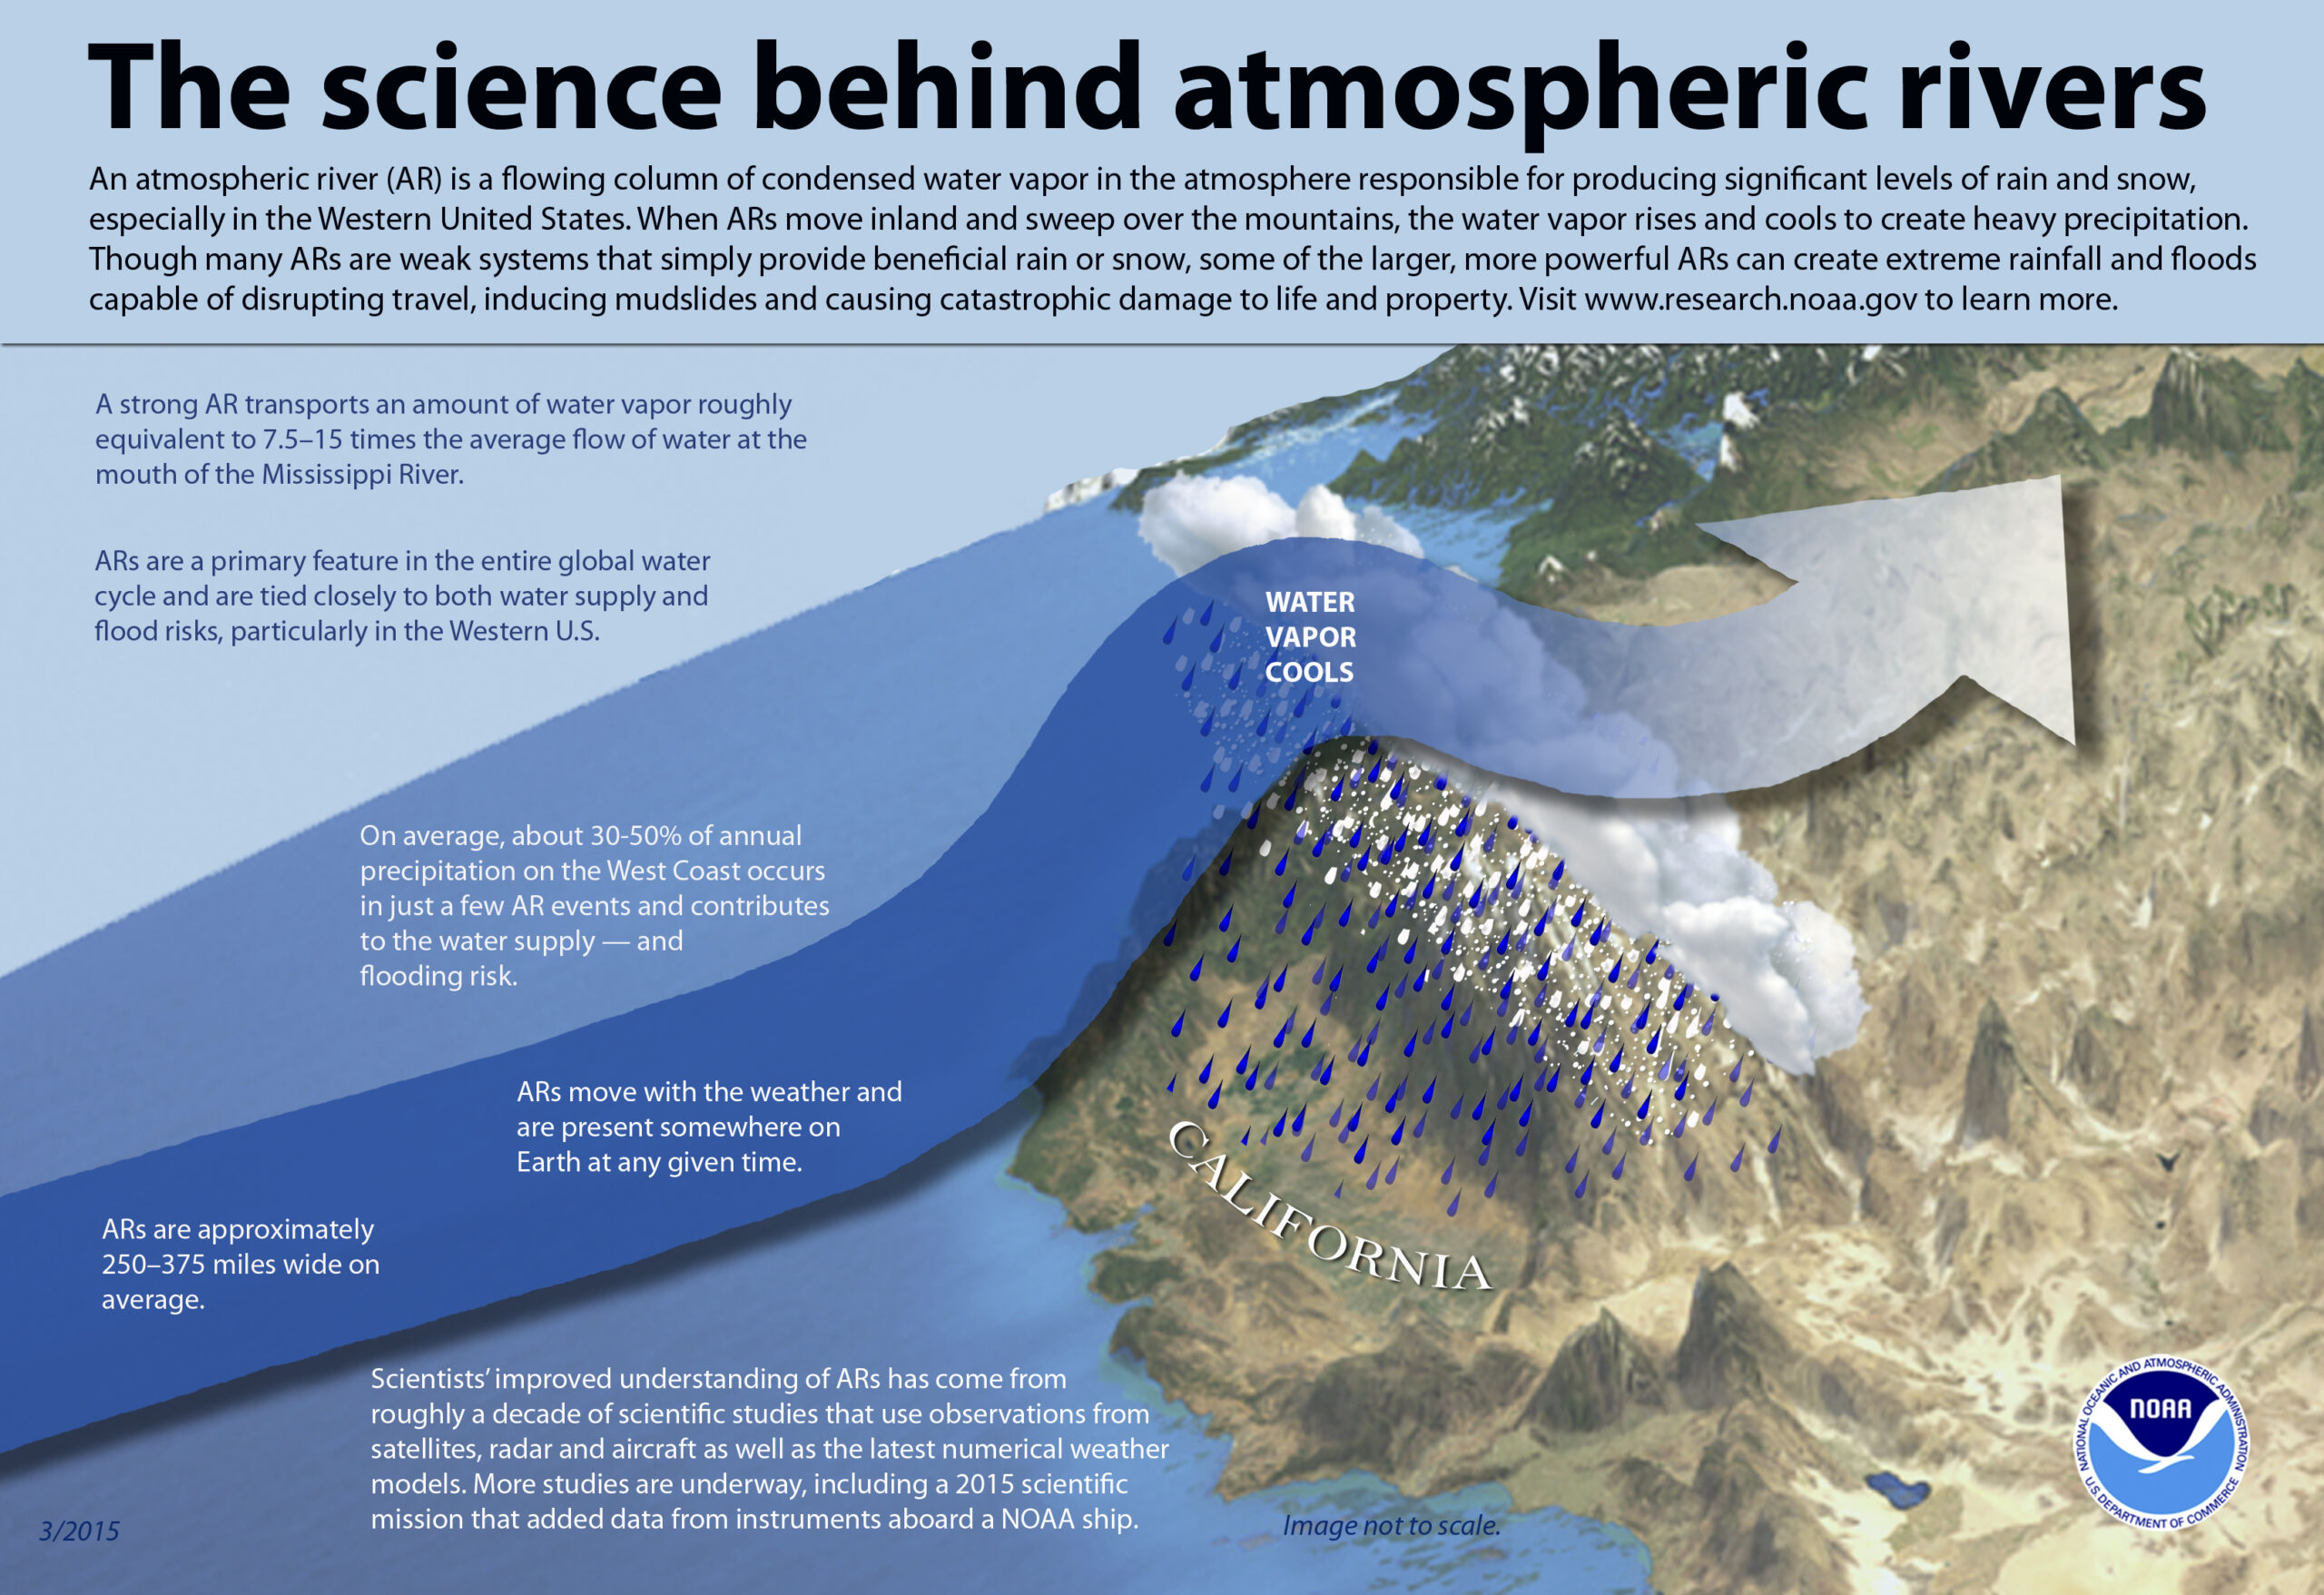 NOAA continues to study how atmospheric rivers evolve over the western U.S.. Image: NOAA